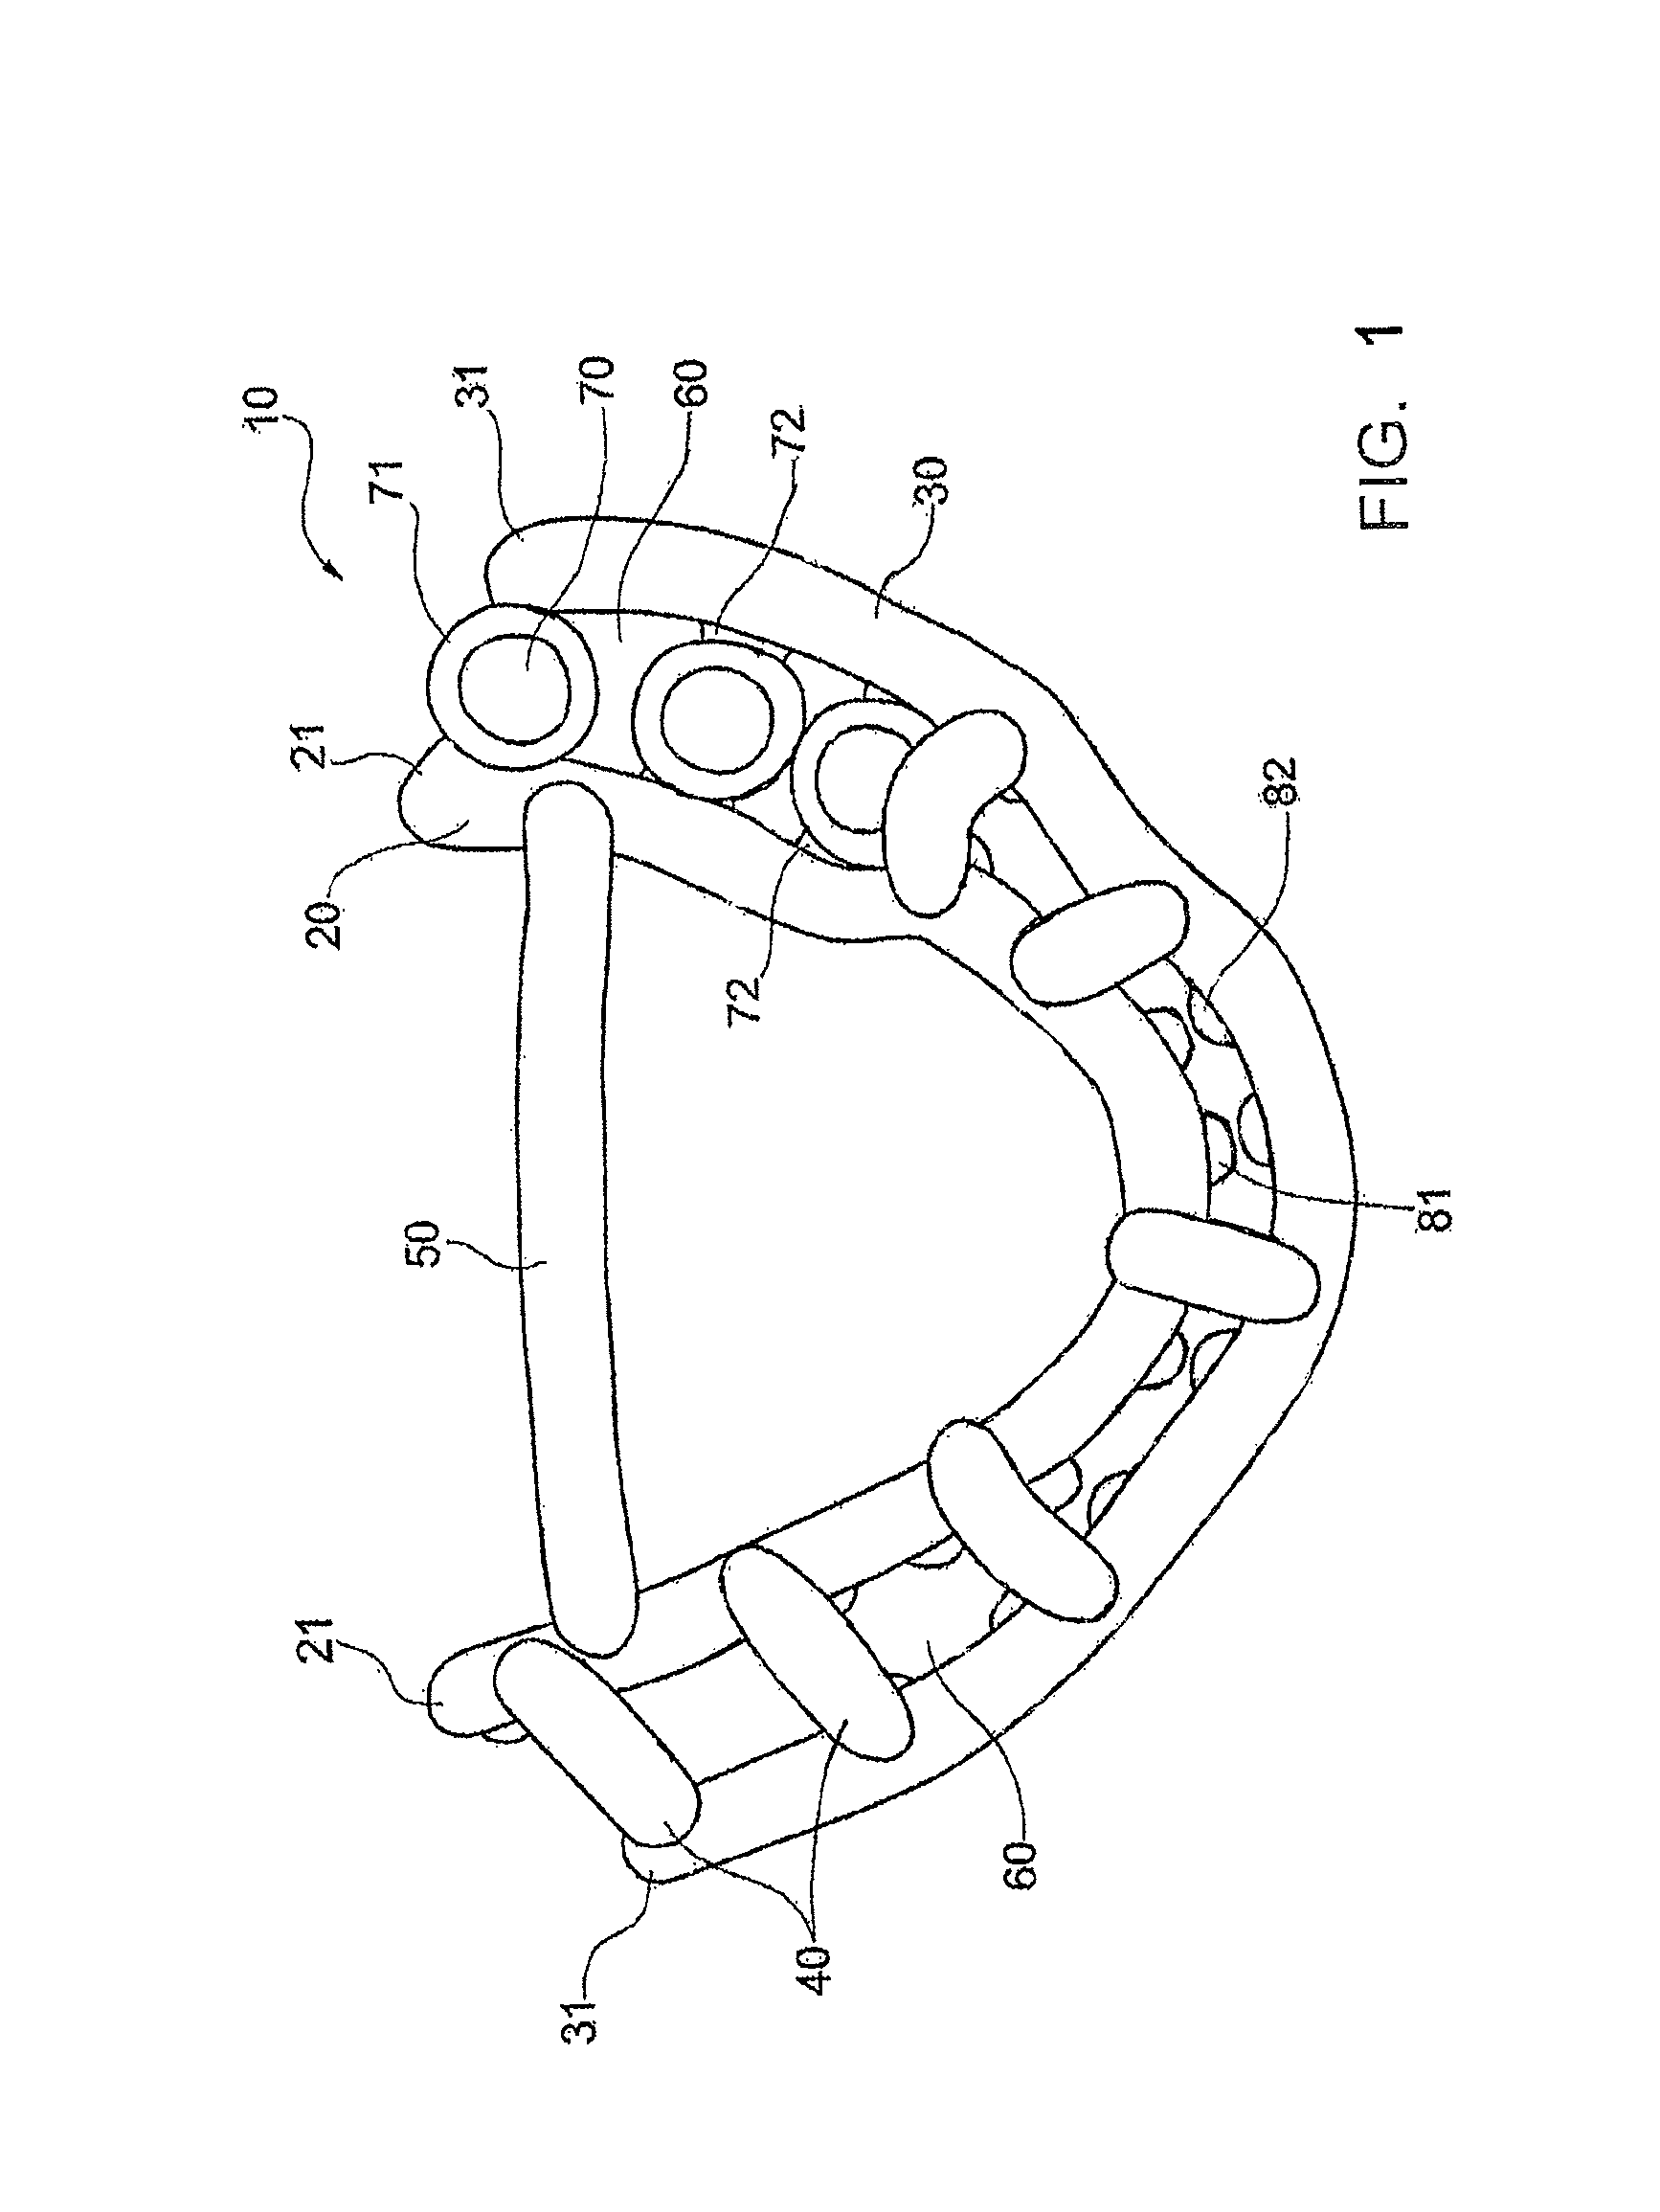 Surgical template for performing dental implantology